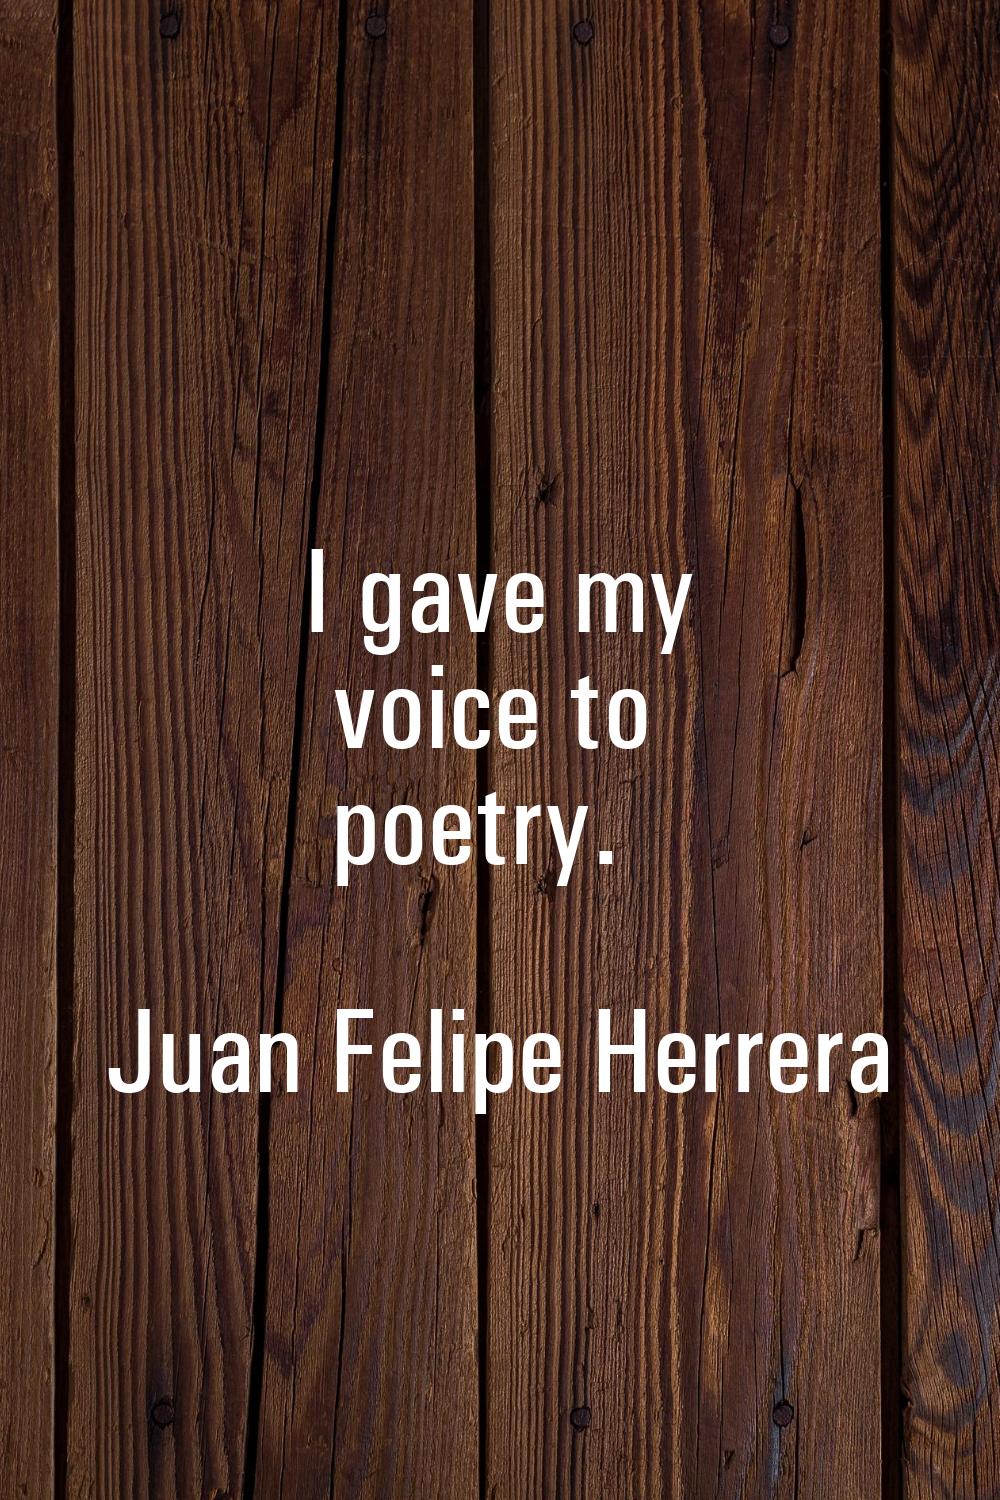 I gave my voice to poetry.